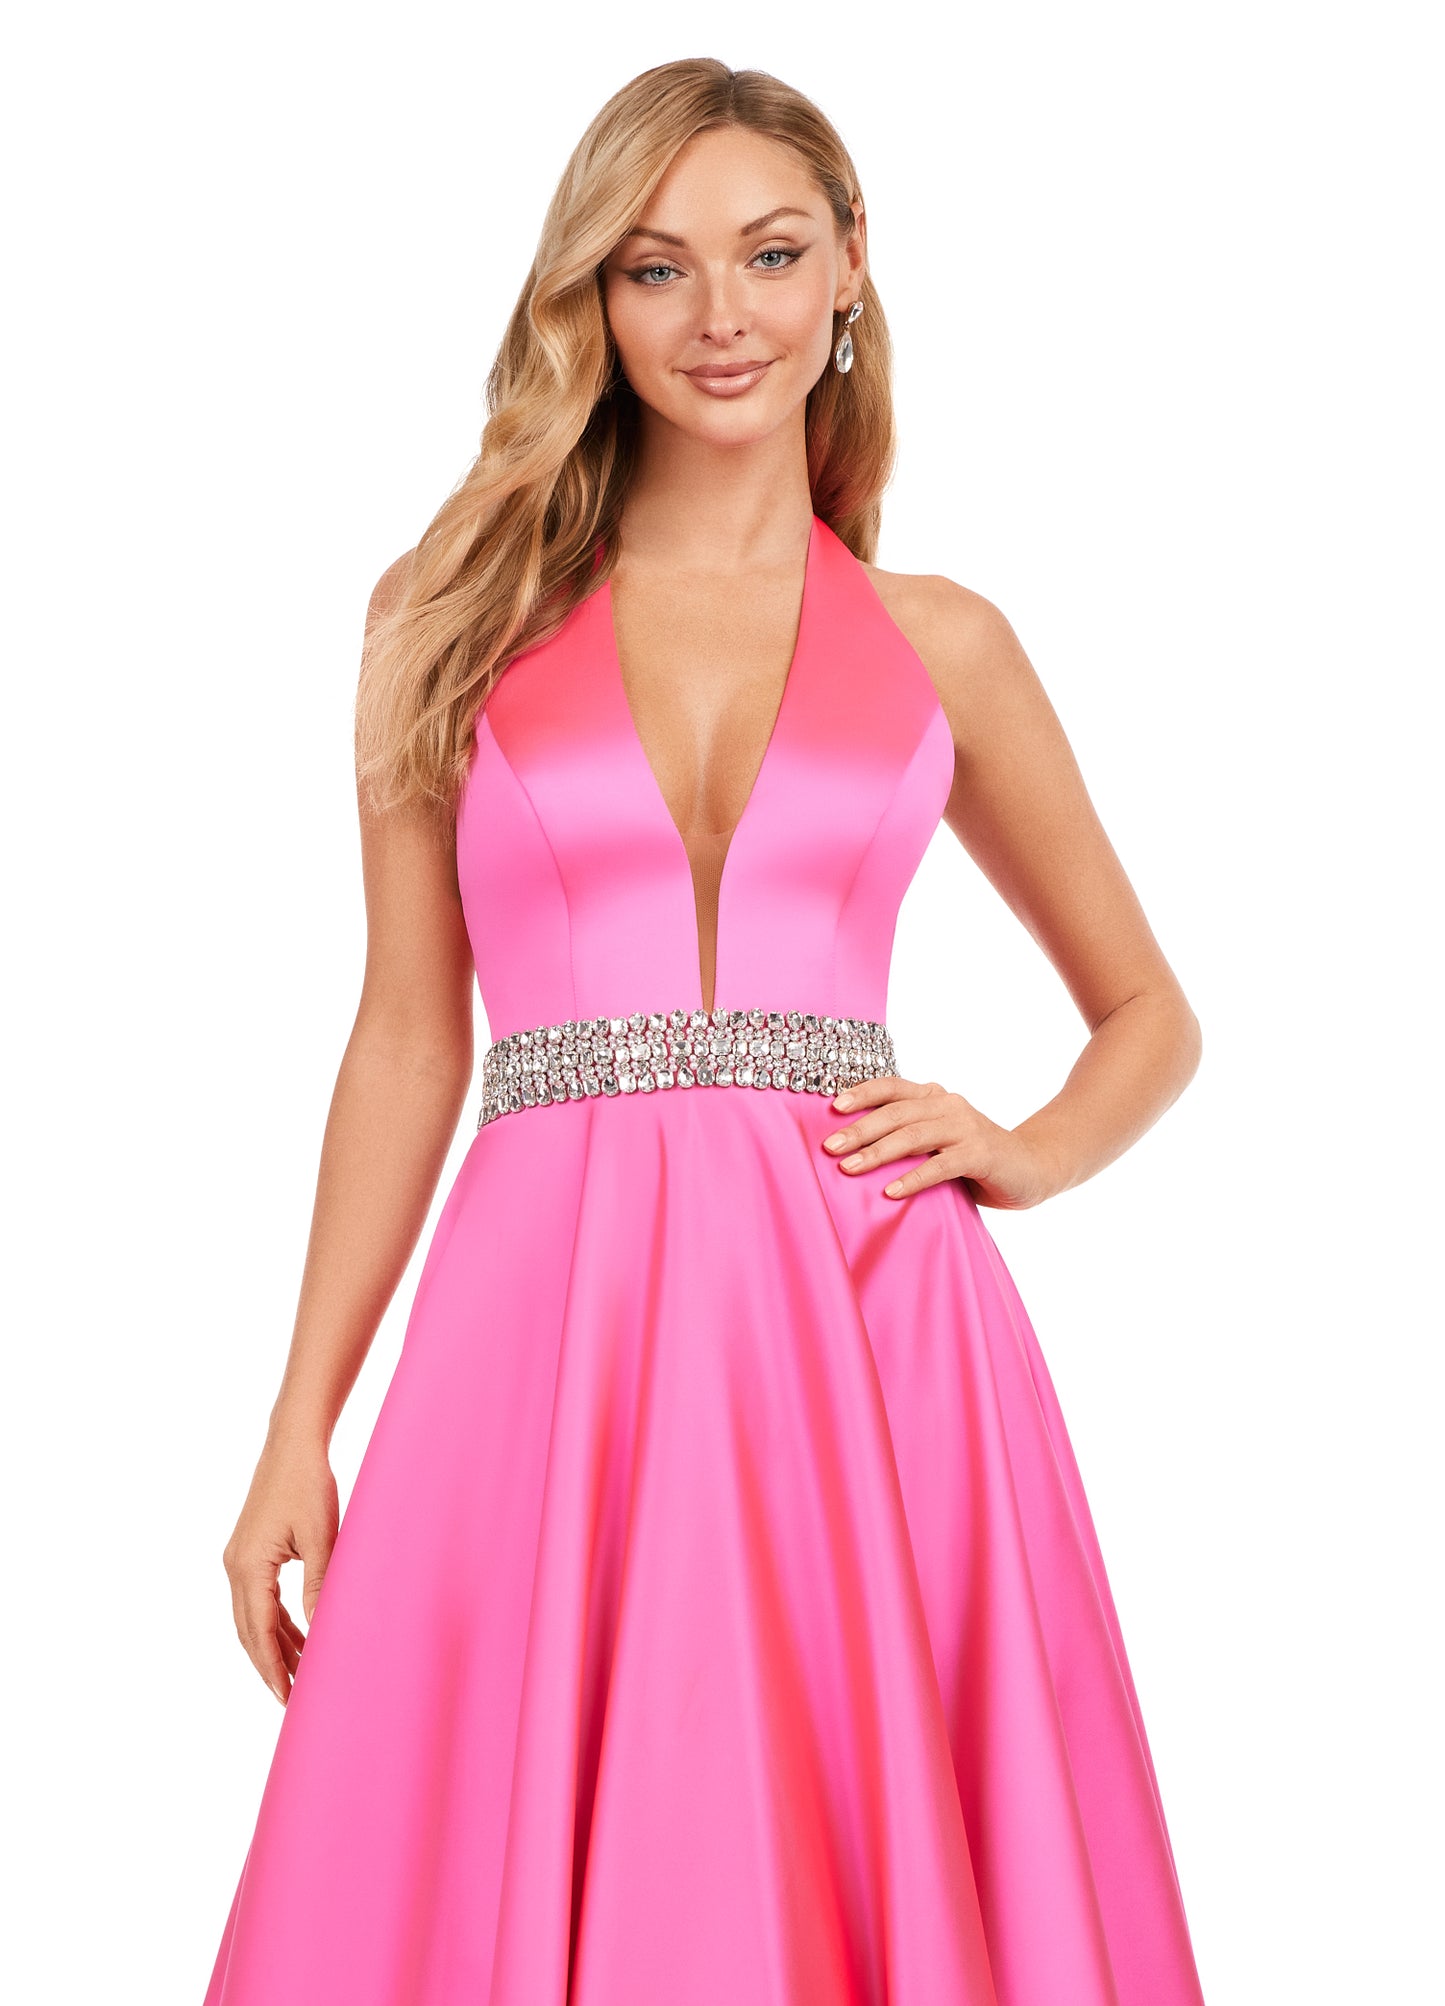 Ashley Lauren 11249 V-Neck Heavy Satin Ballgown Halter Top Open Back Crystal Belt Formal Gown. Make a statement in this beautiful long satin dress, featuring a halter neckline and crystal beaded accent belt.